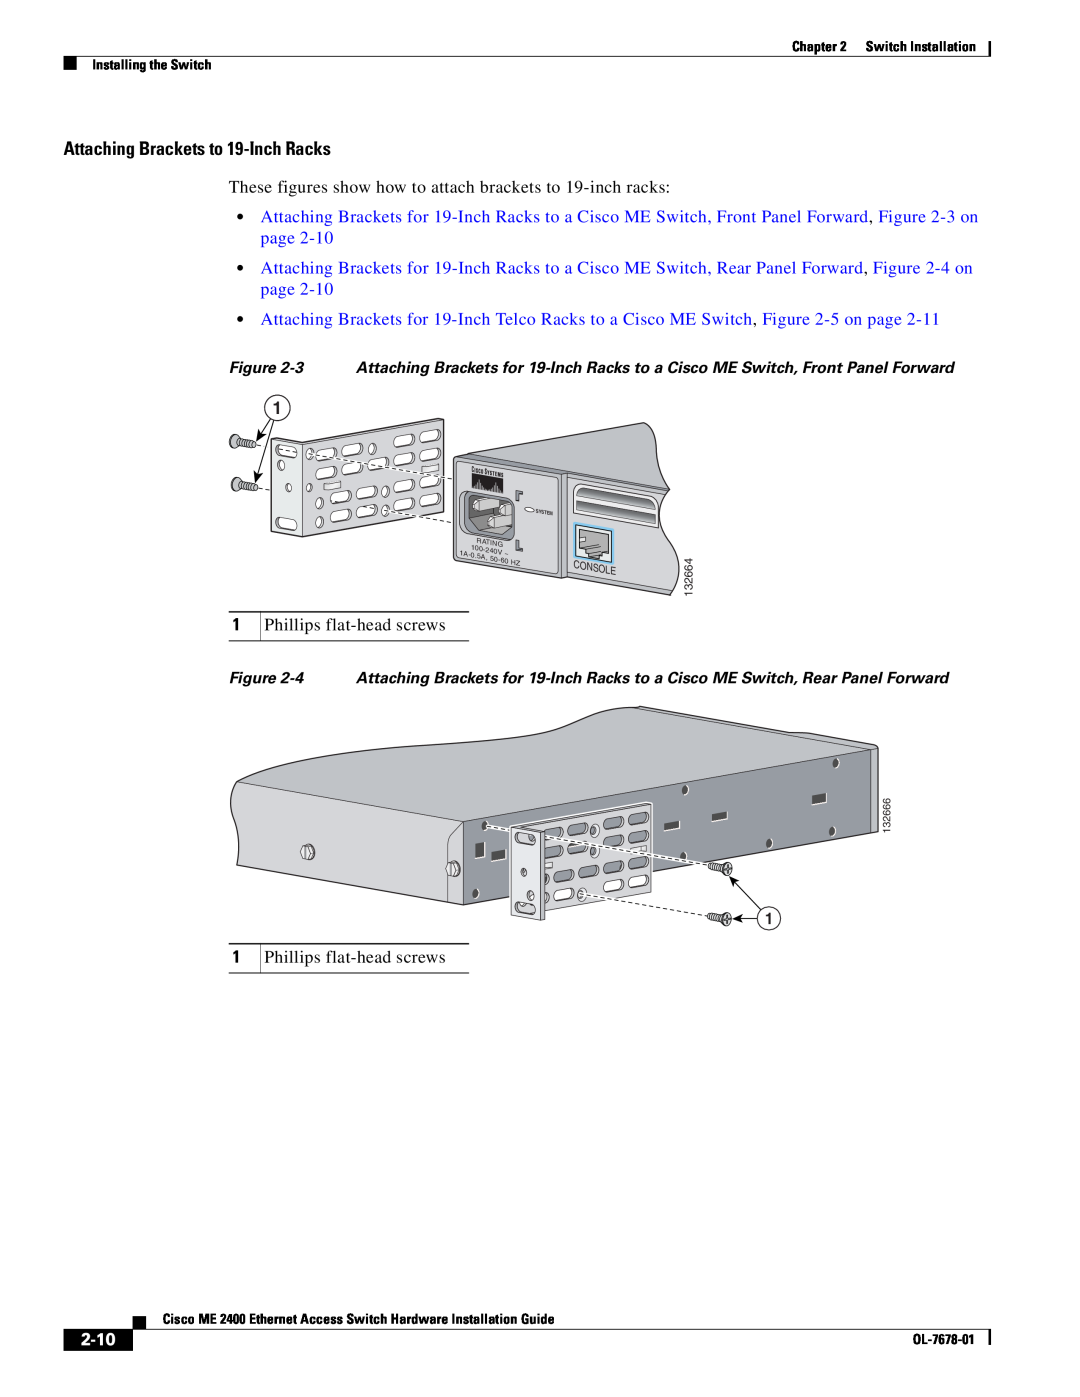 Cisco Systems ME 2400 manual Attaching Brackets to 19-Inch Racks, 2-10, 240V, 50-60, Console 